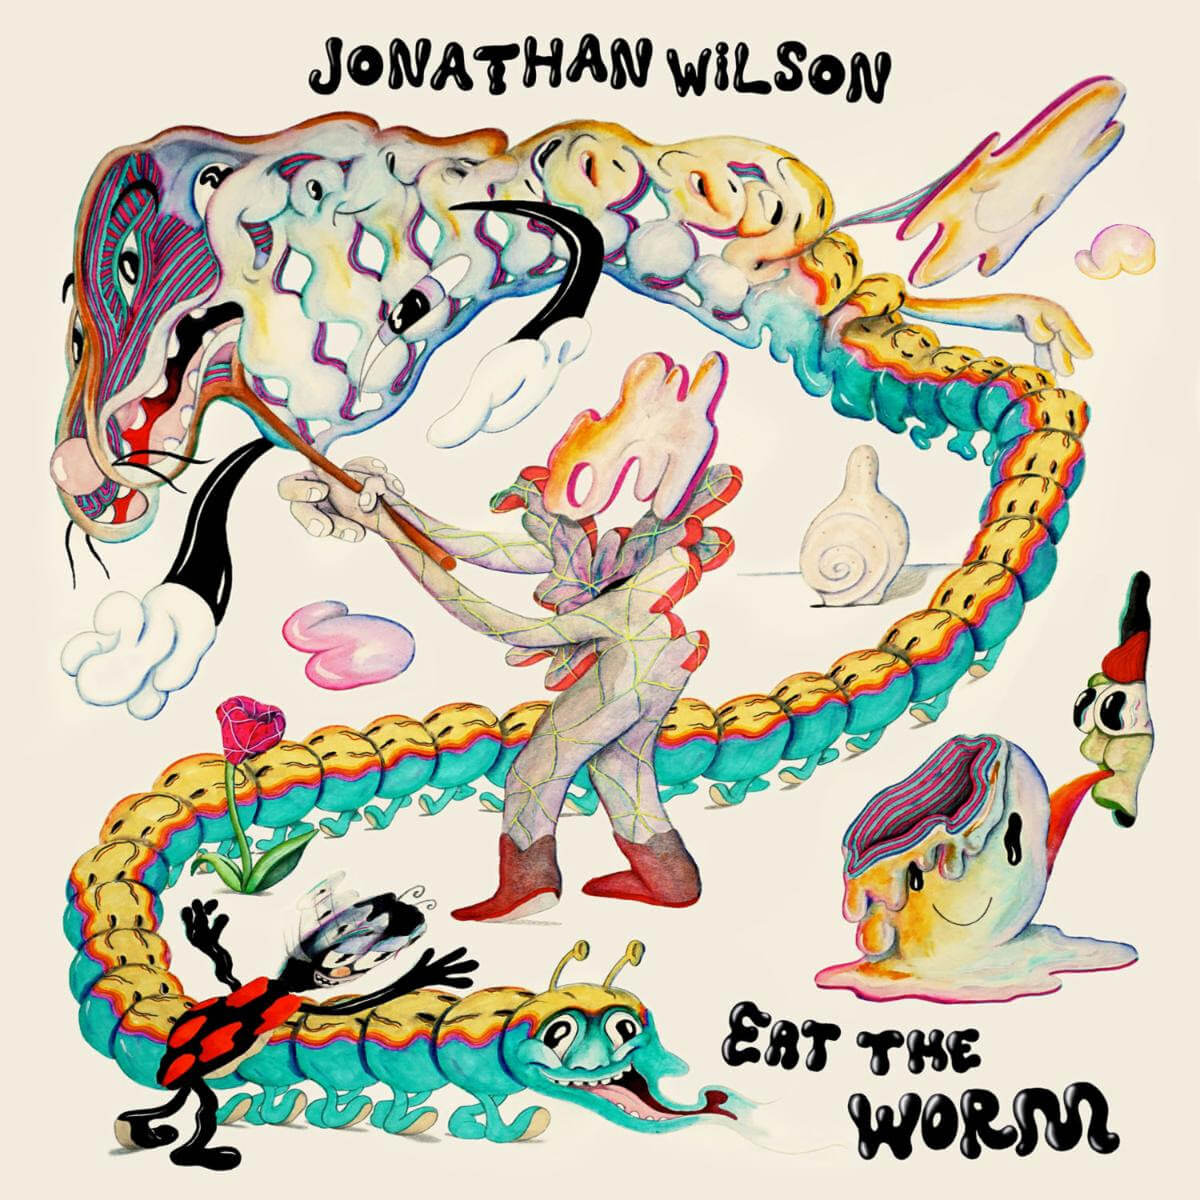 Singer/songwriter, and producer Jonathan Wilson has announced new album, Eat the Worm, will be released September 8th via BMG